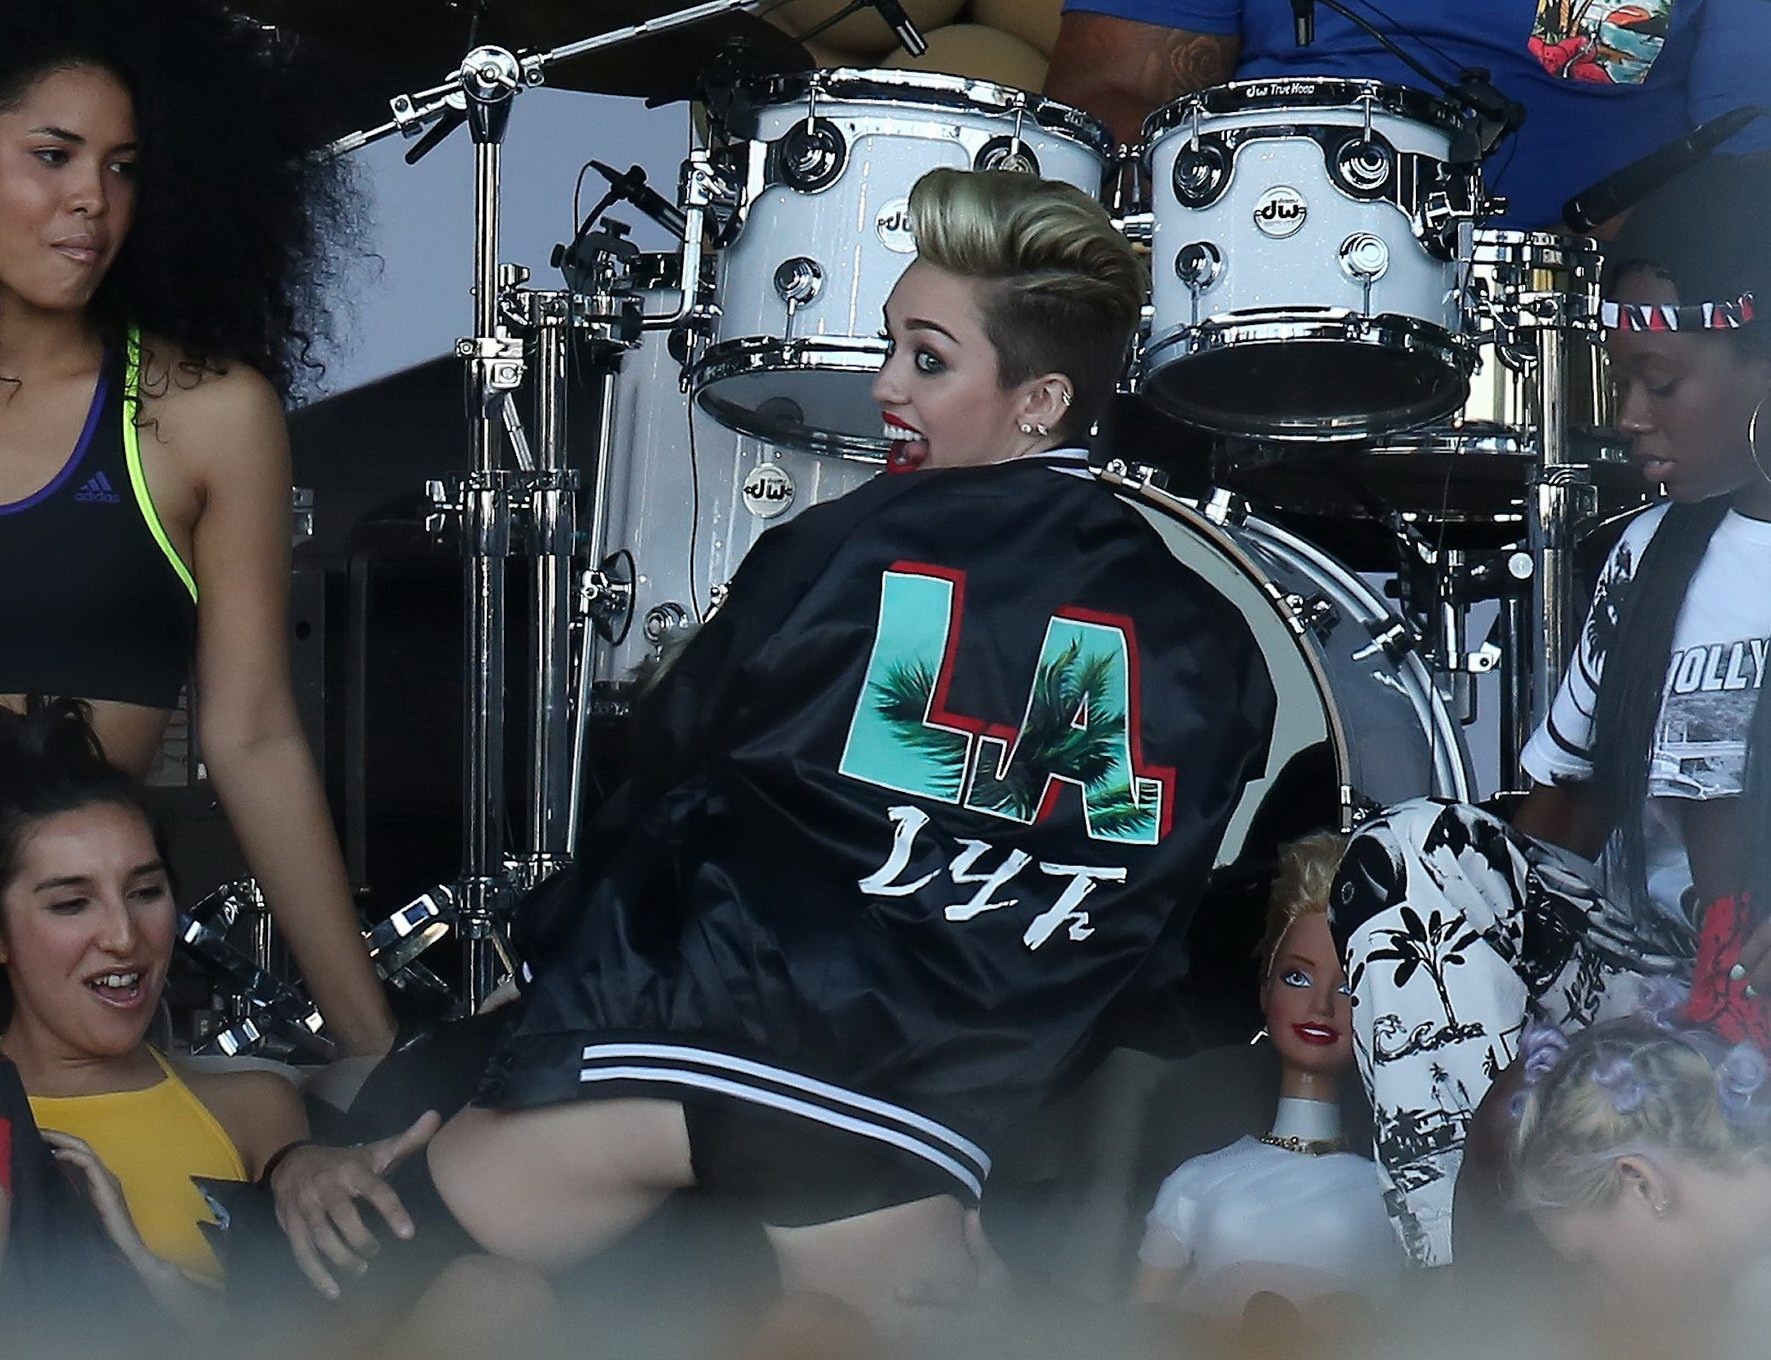 Miley Cyrus in panties  fuck-me boots performing at the Jimmy Kimmel show #75226995